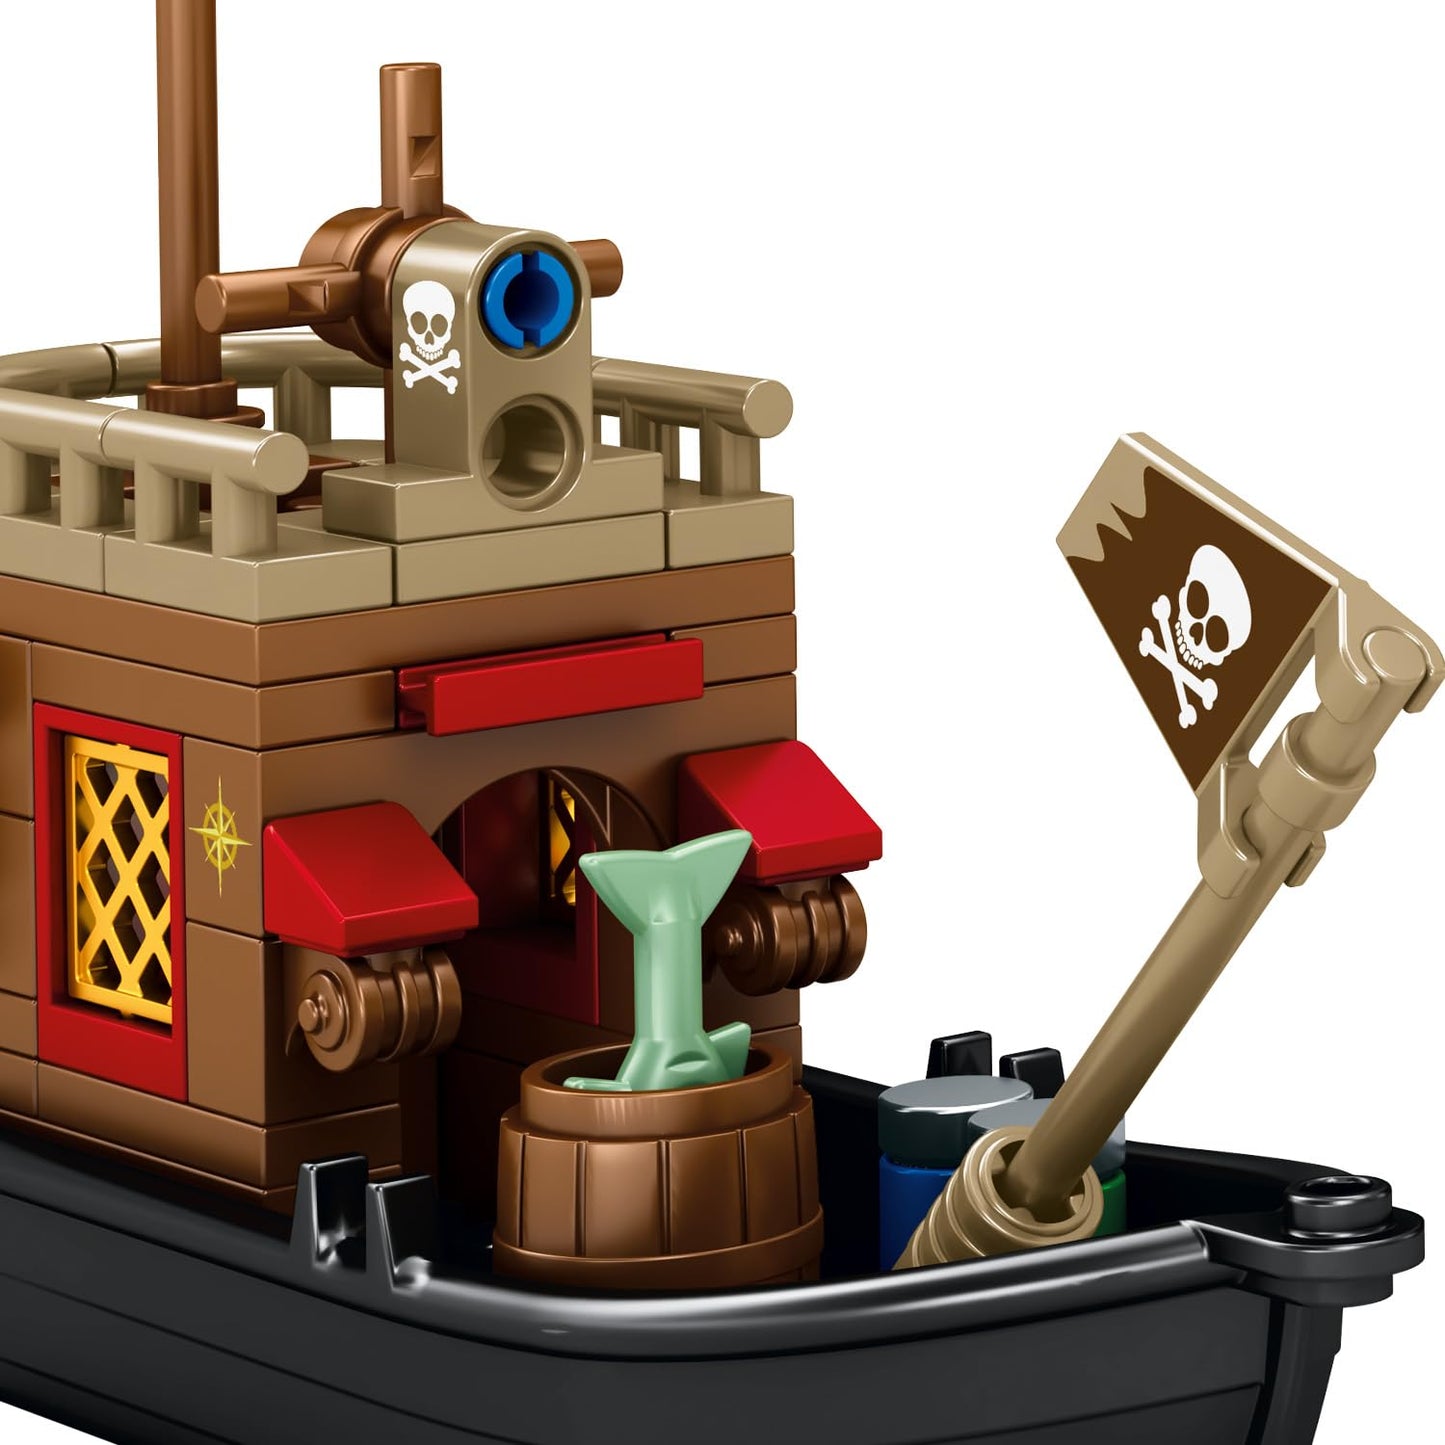 RiceBlock Pirate Ship Set Pirate's Wharf Supply Center Building Brick Toy, for Boys and Girl Ages 8 Years and up, 573 Pcs(Compatible with Lego)